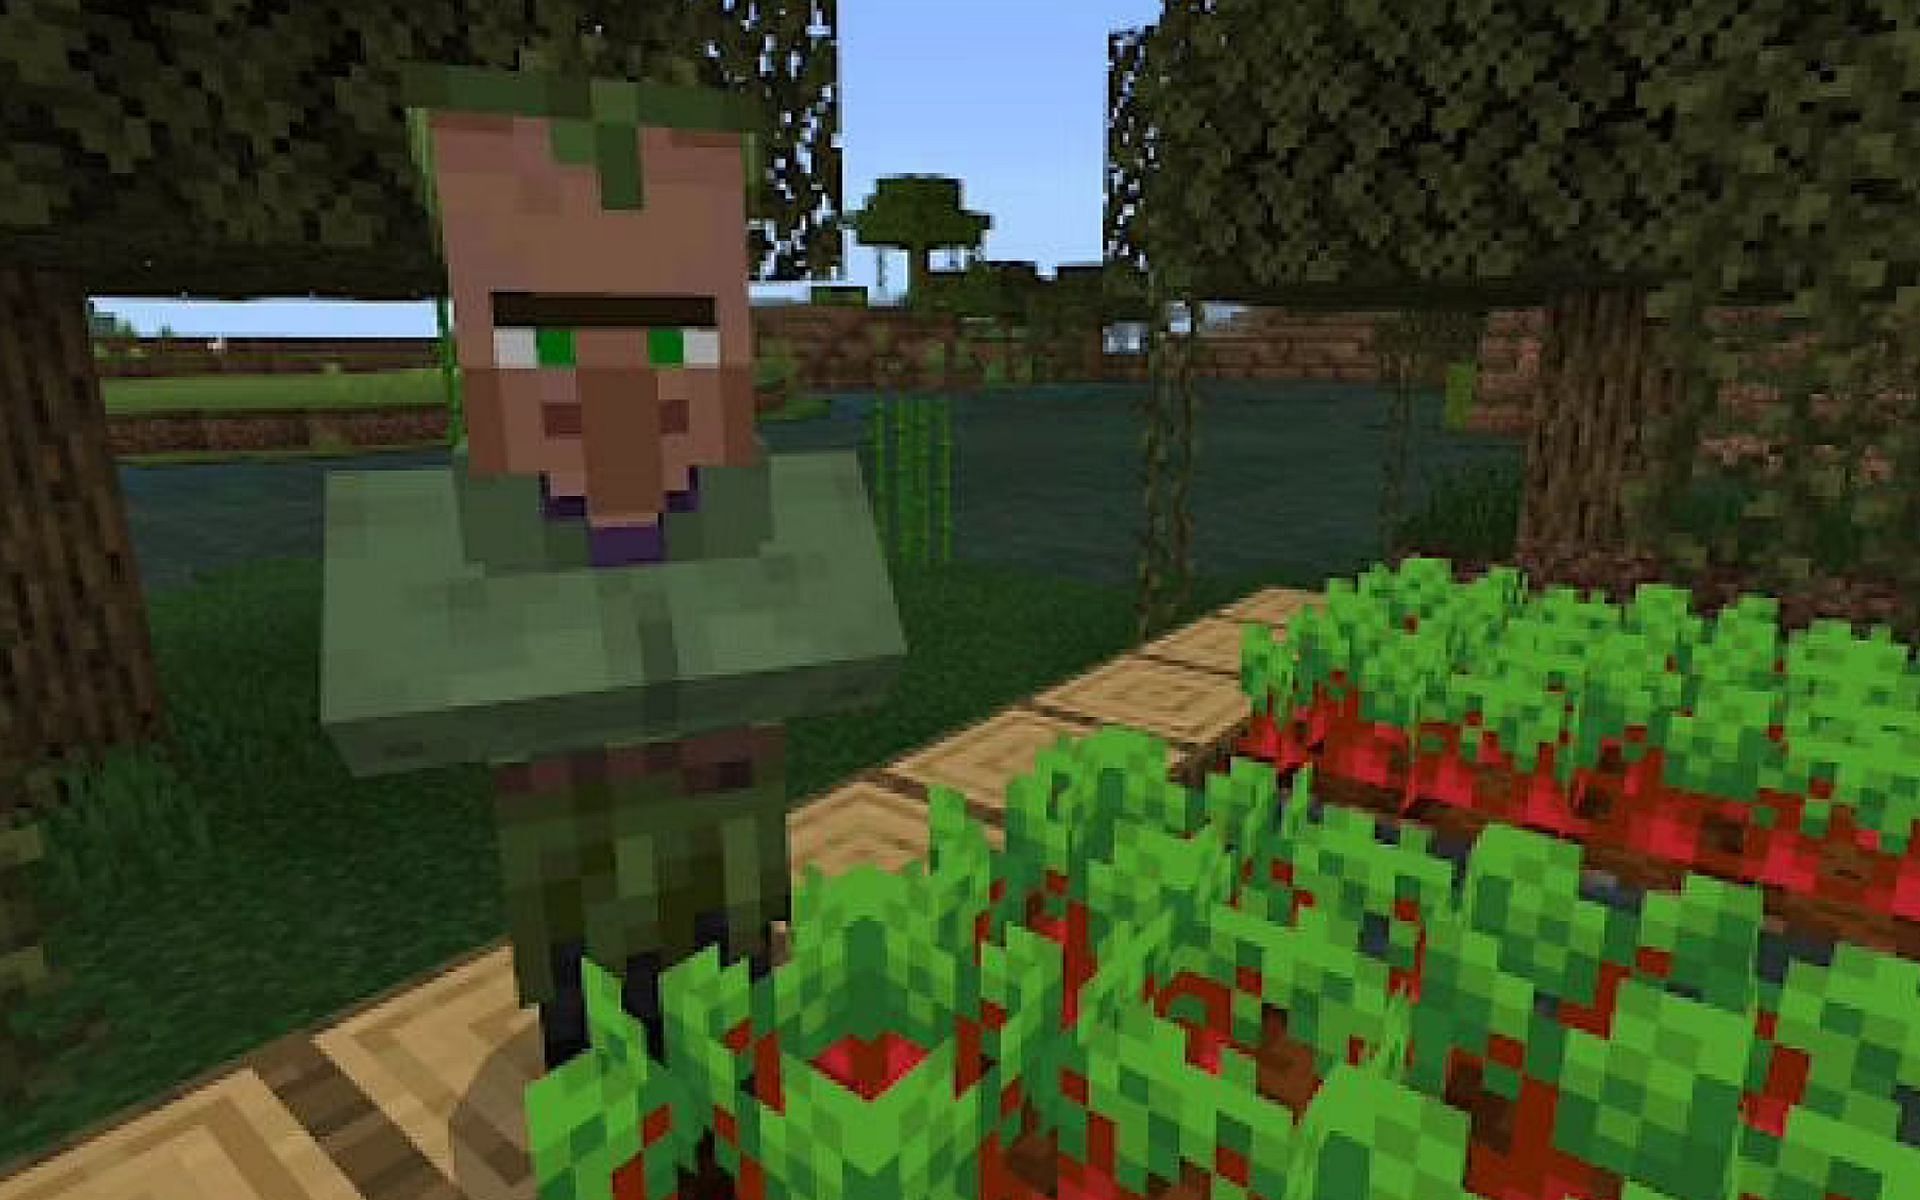 A swamp villager in-game (Image via Minecraft)